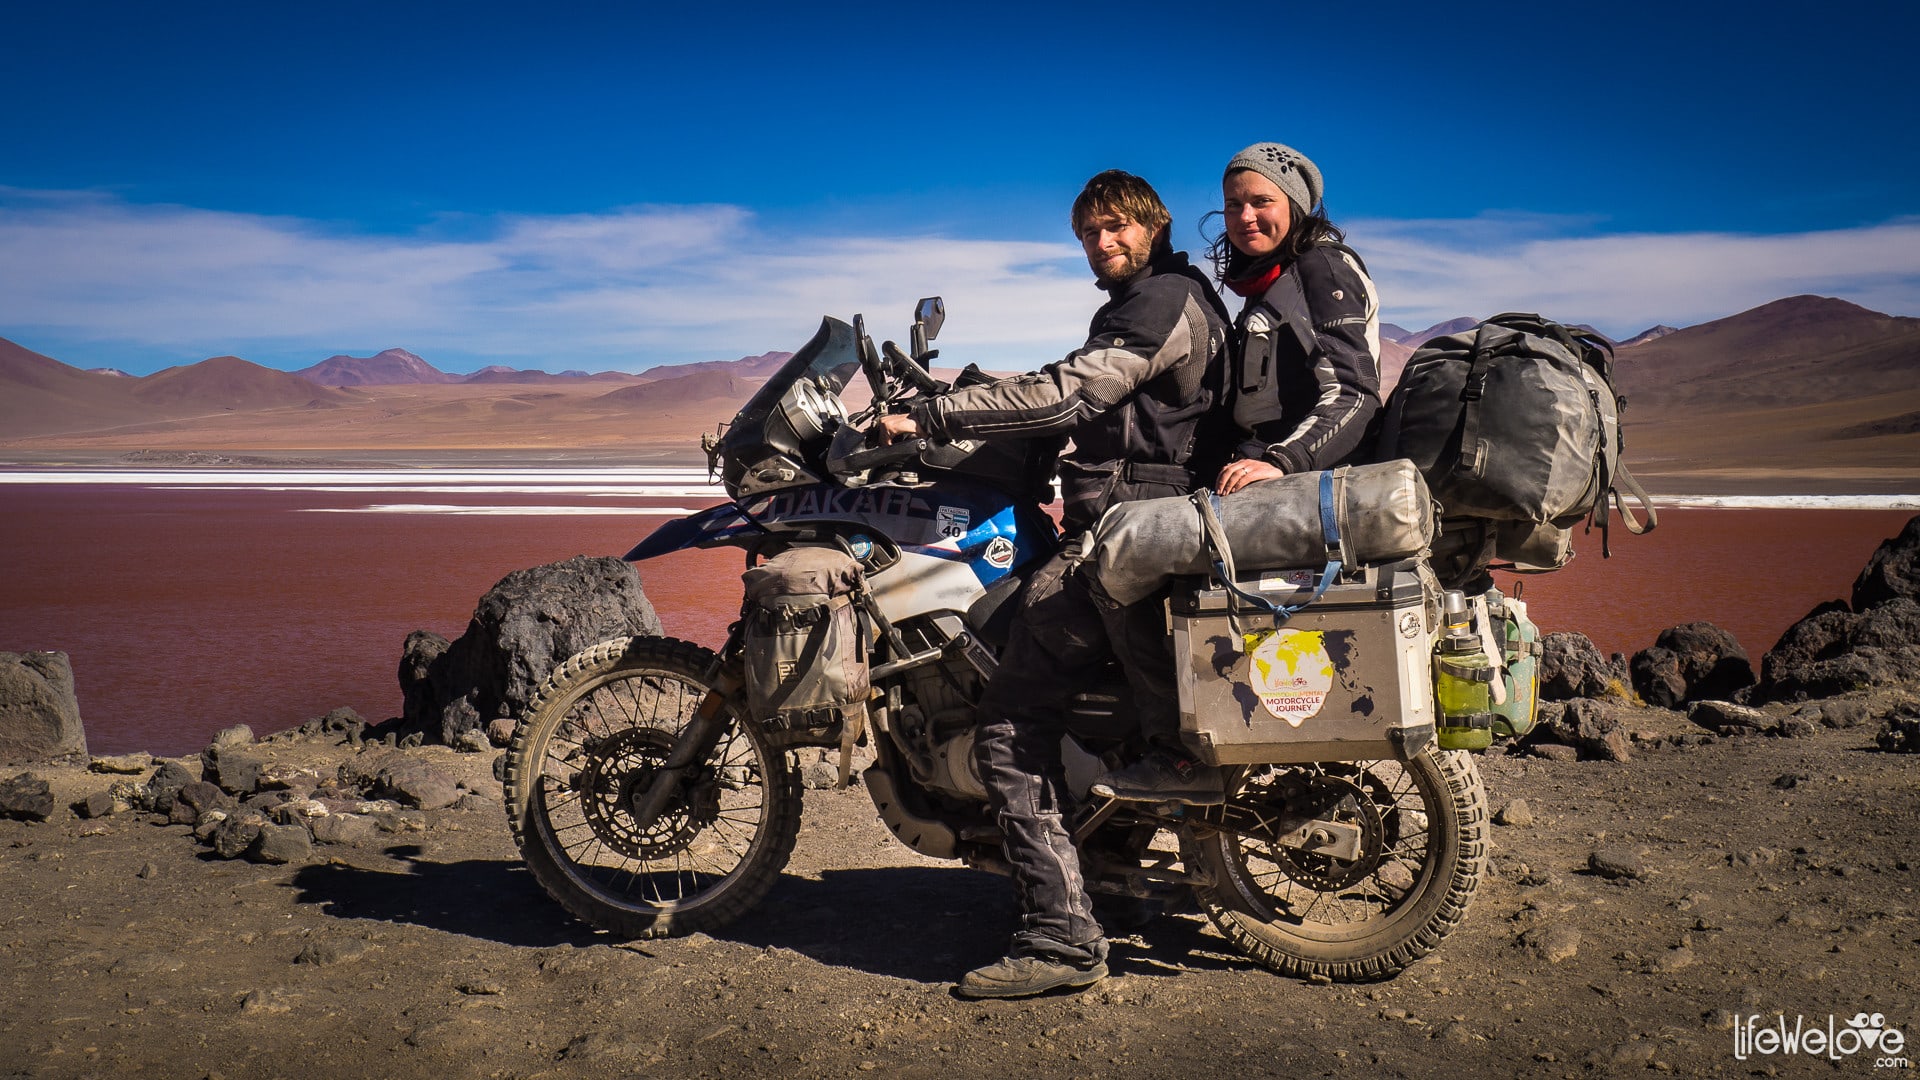 Bmw Motorcycle Trip Around The World | Reviewmotors.co